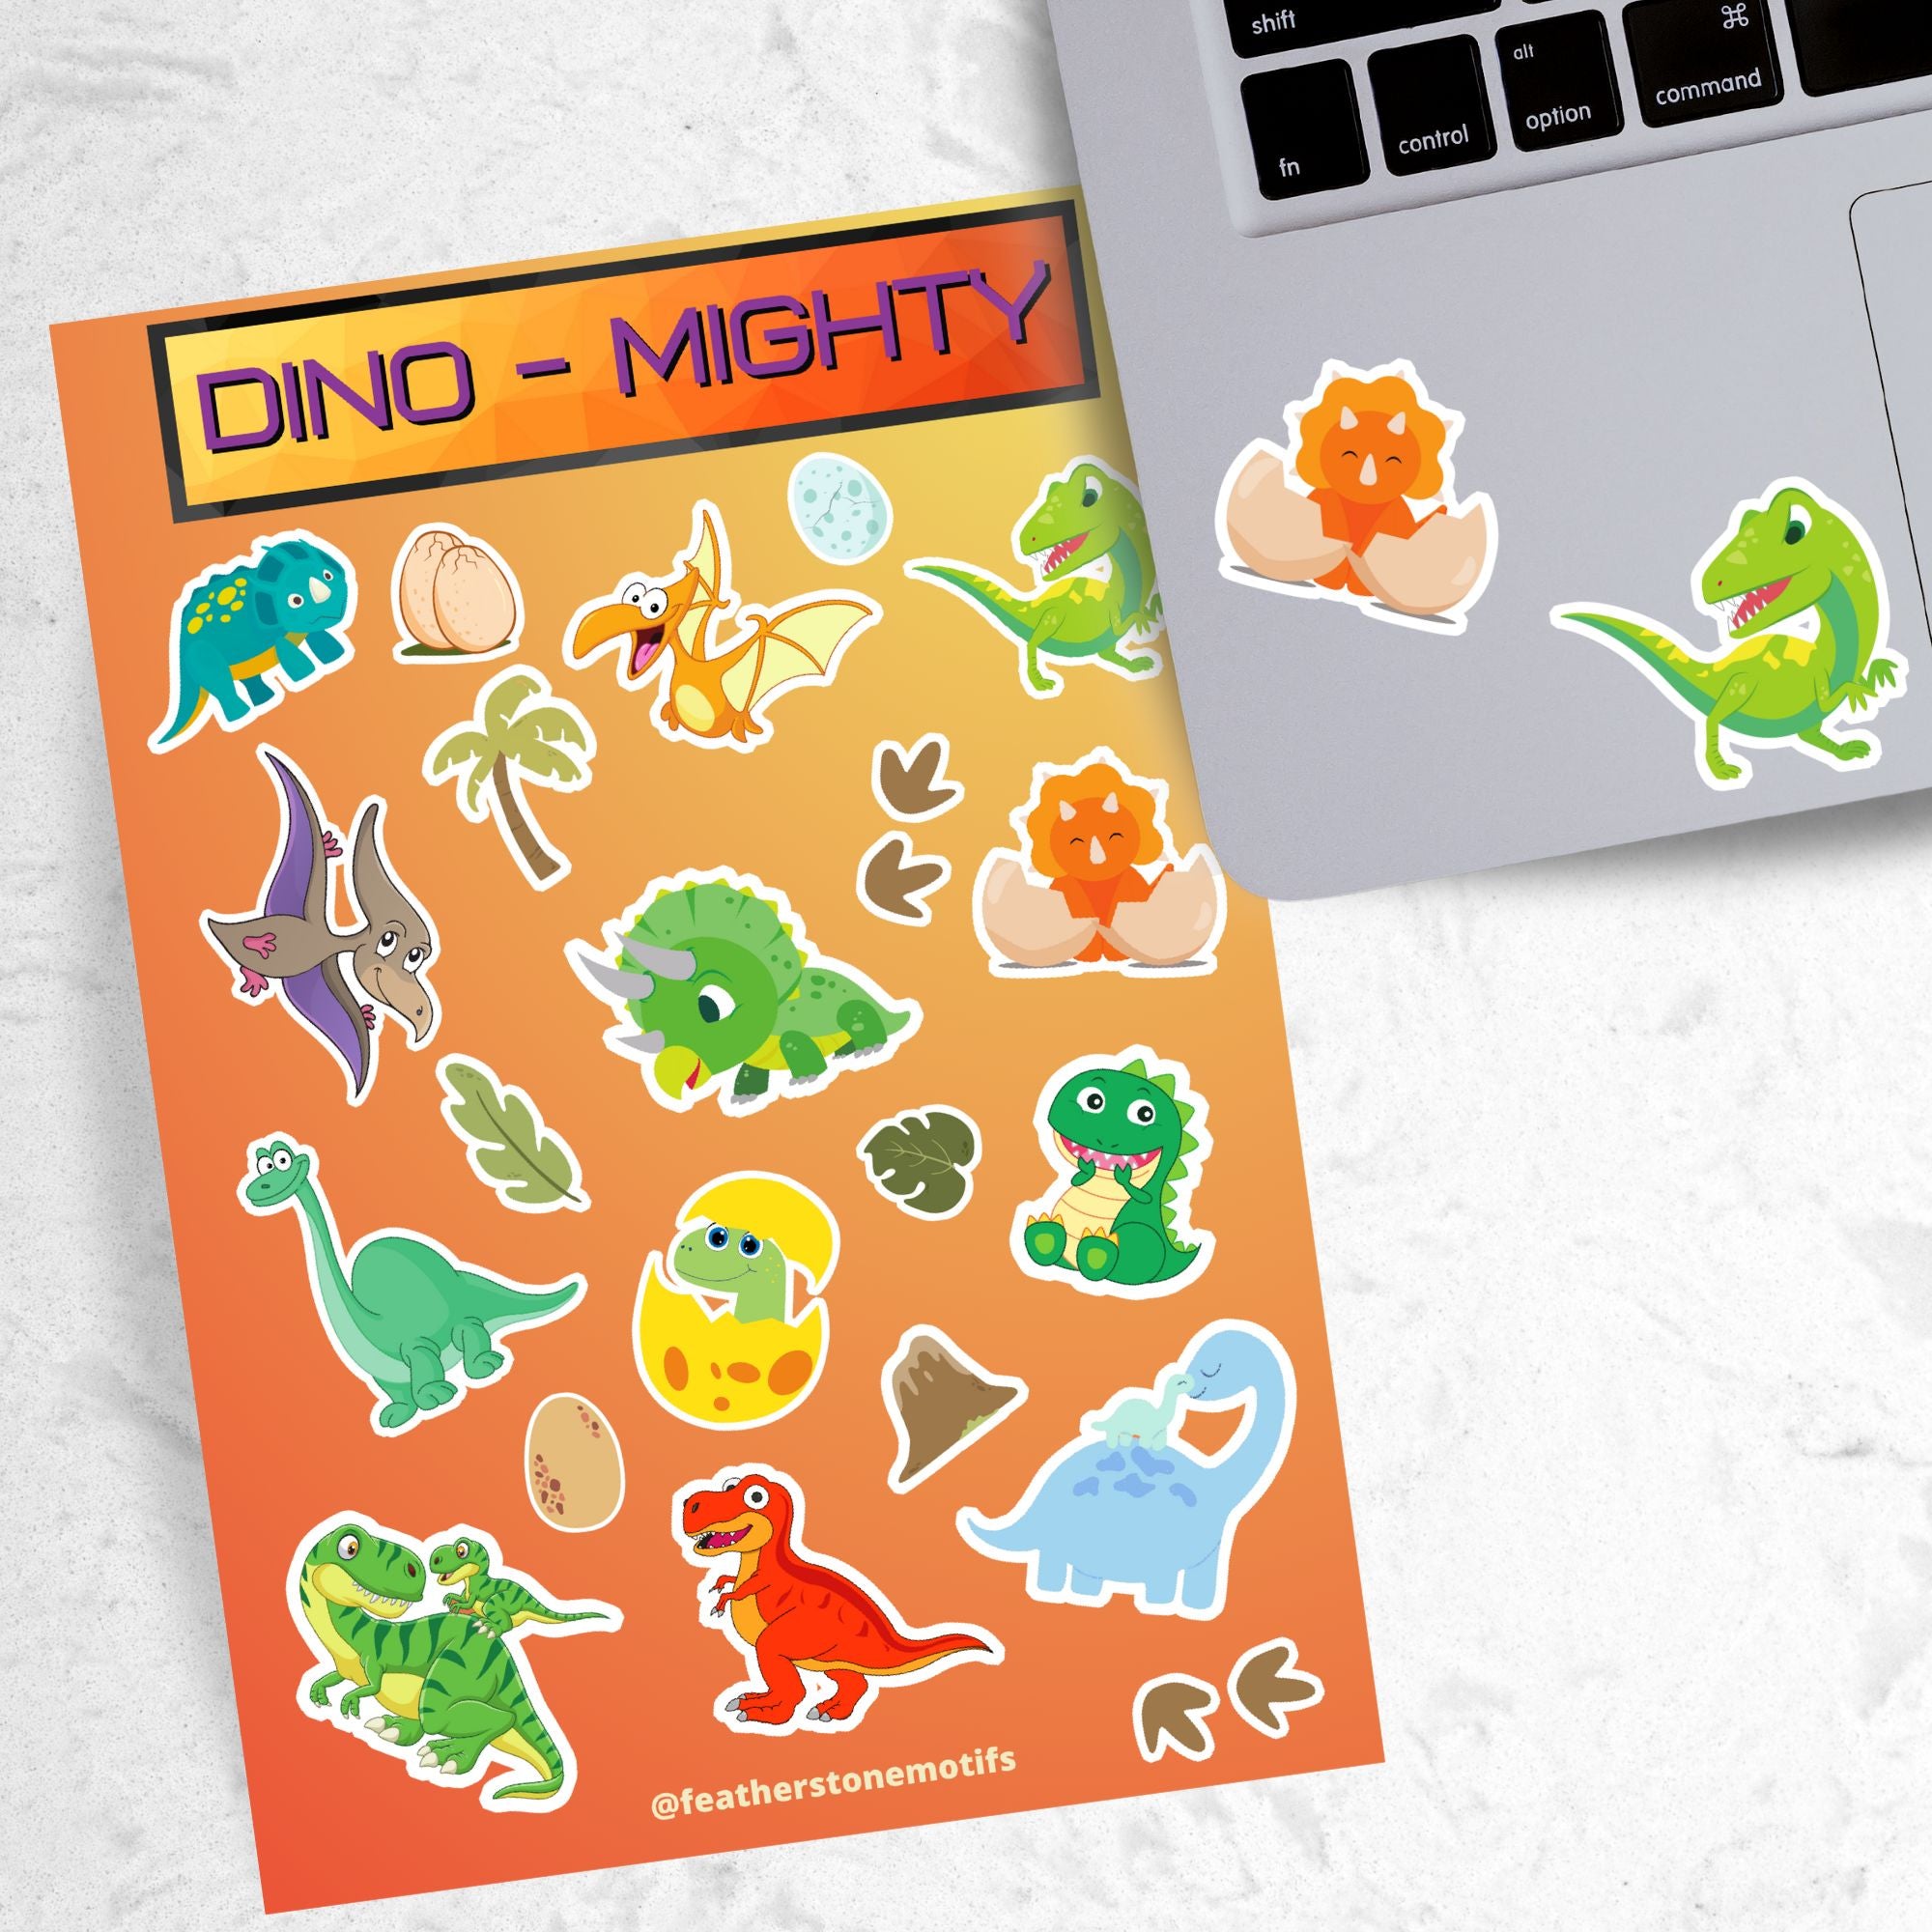 These dinosaur stickers are a-roar-able! This sticker sheet has all of your favorite dinosaurs plus dino eggs, plants, and dino footprints. This image has the sticker sheet next to an open laptop with a sticker of a dino hatching from and egg and a T-Rex dino sticker applied below the keyboard.